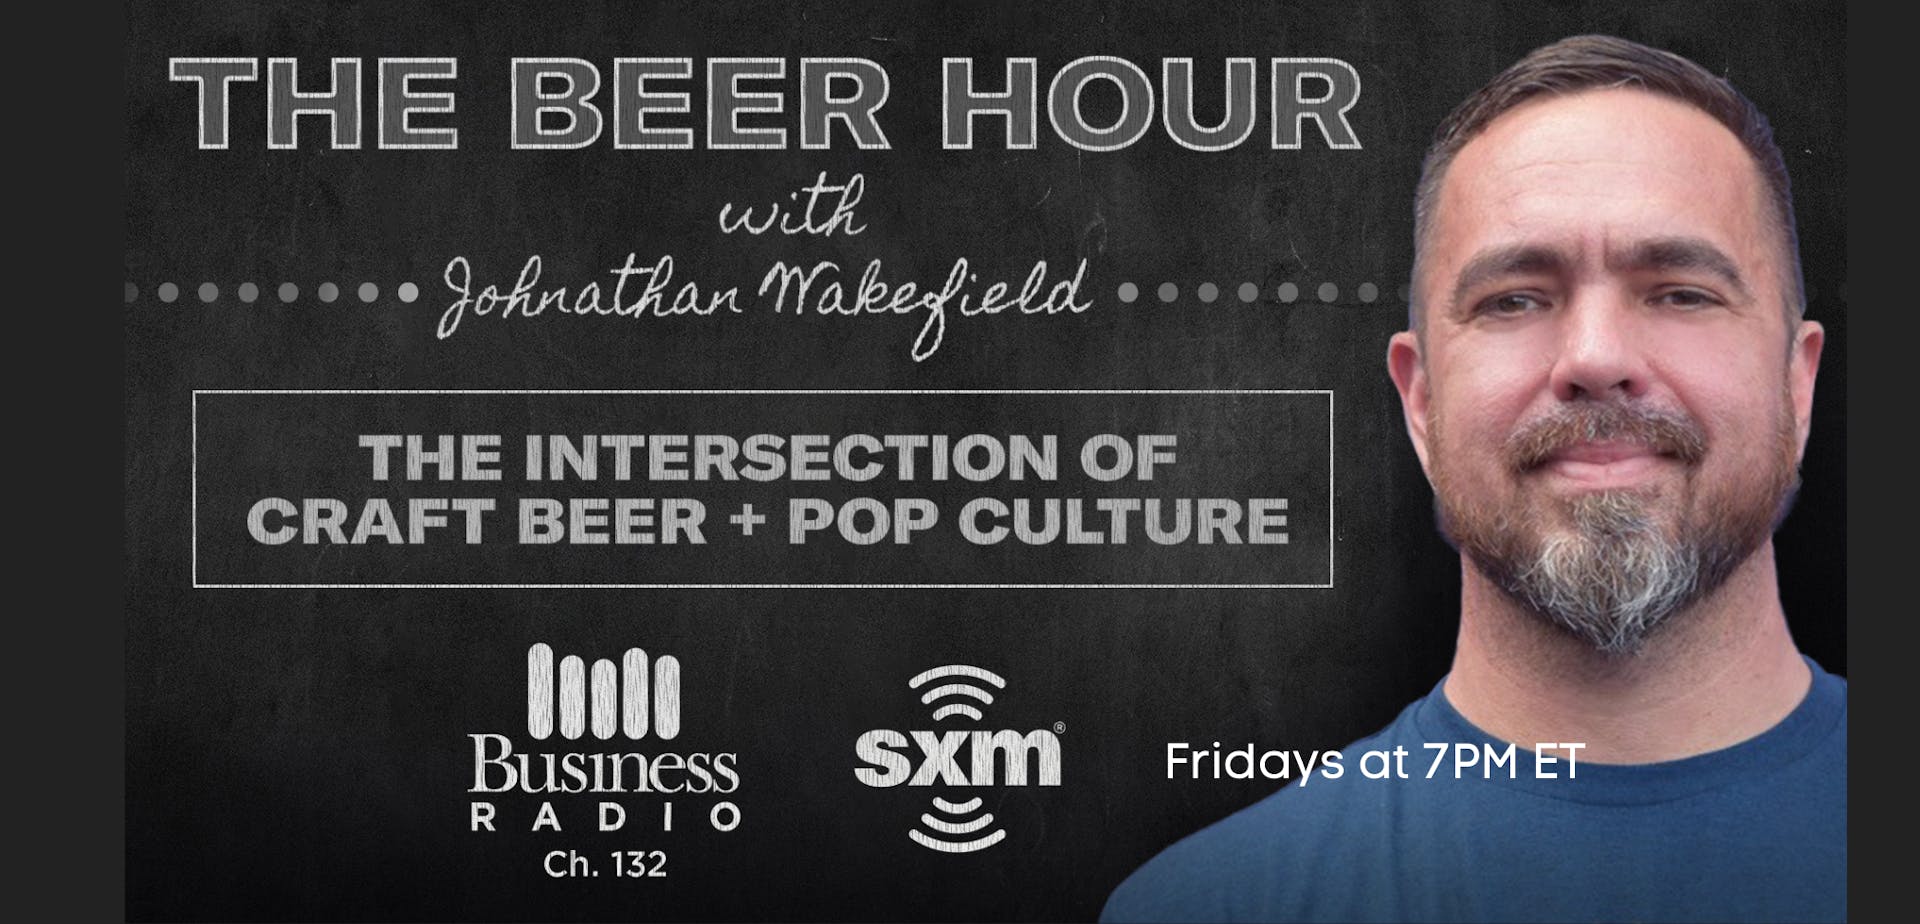 The Beer Hour Promo